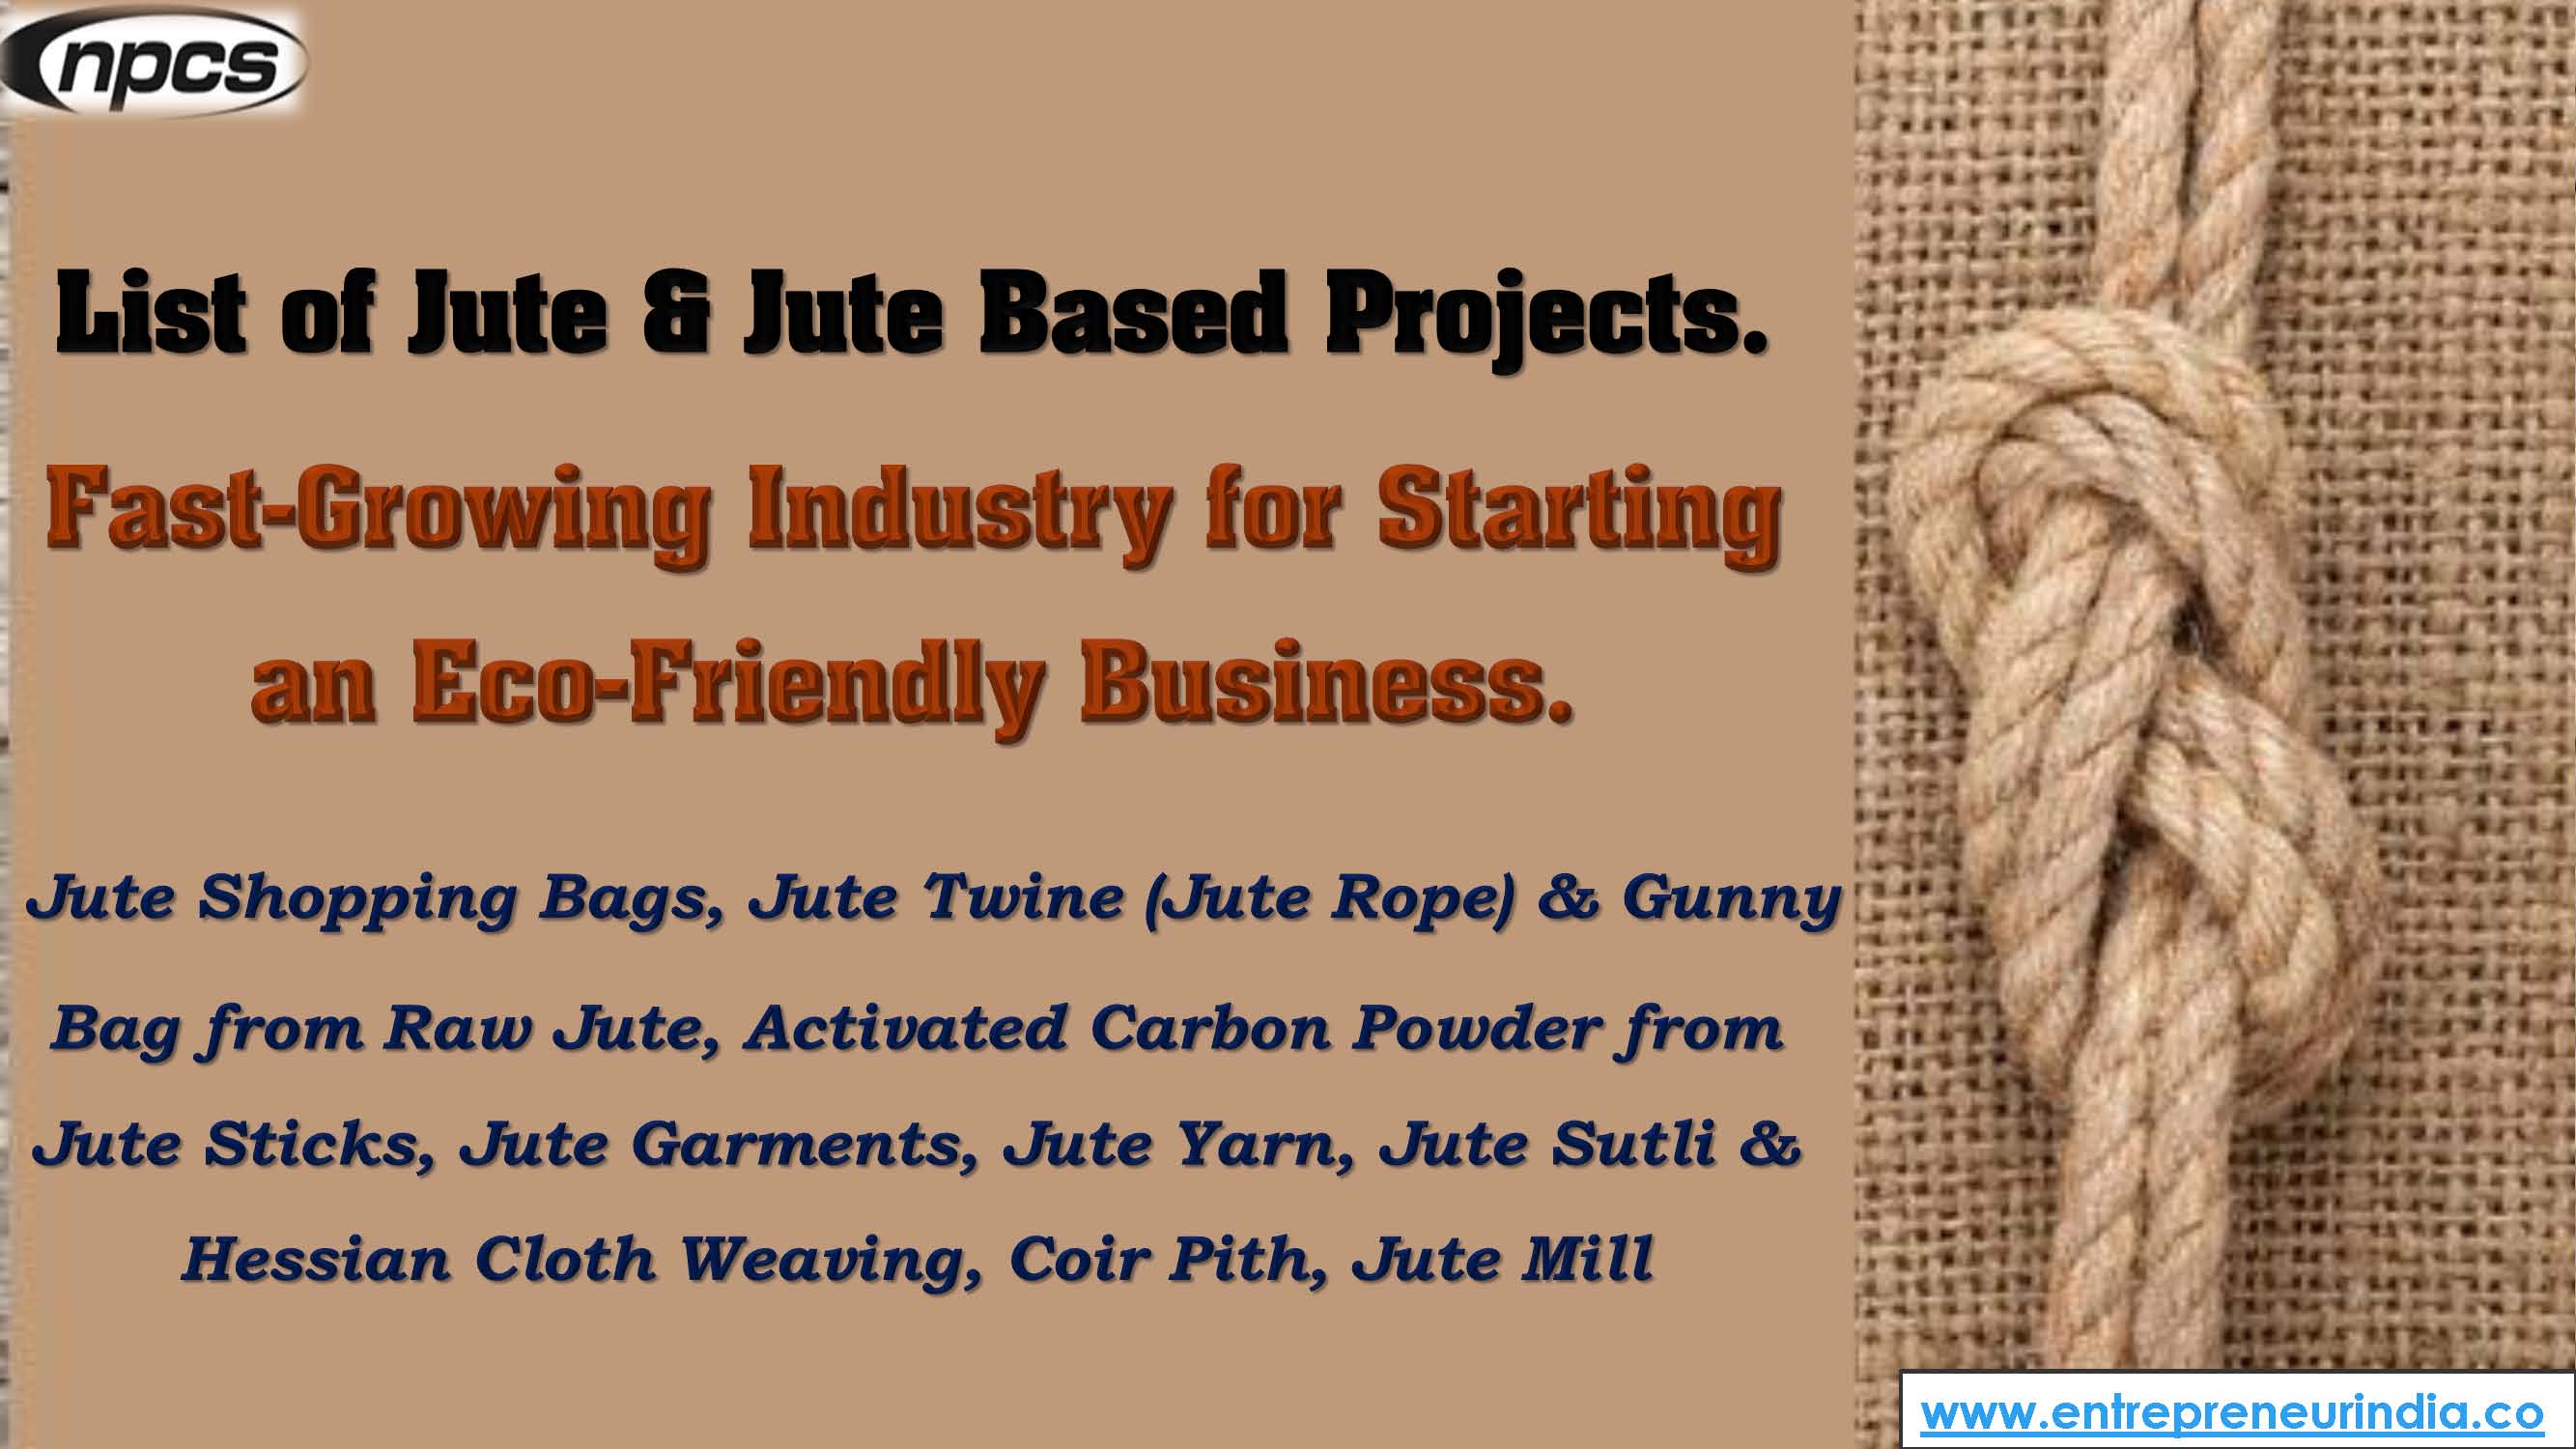 List of Jute & Jute Based Projects. Fast-Growing Industry for Starting an Eco-Friendly Business..jpg